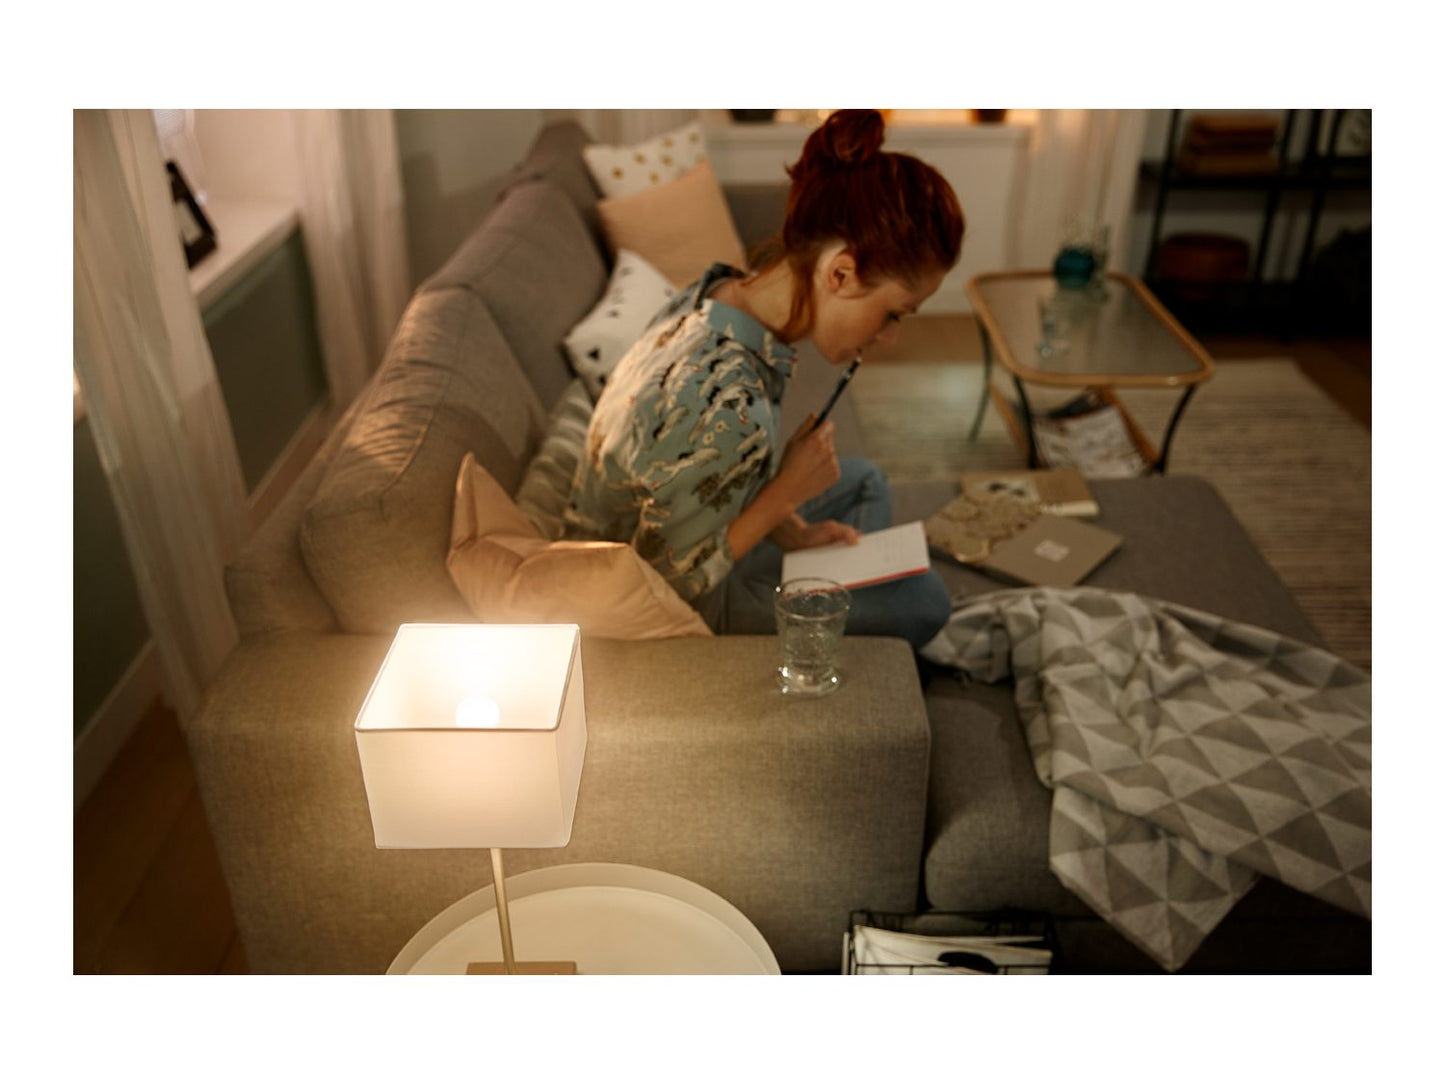 Philips Hue White E14 Luster Doppelpack 2x470lm